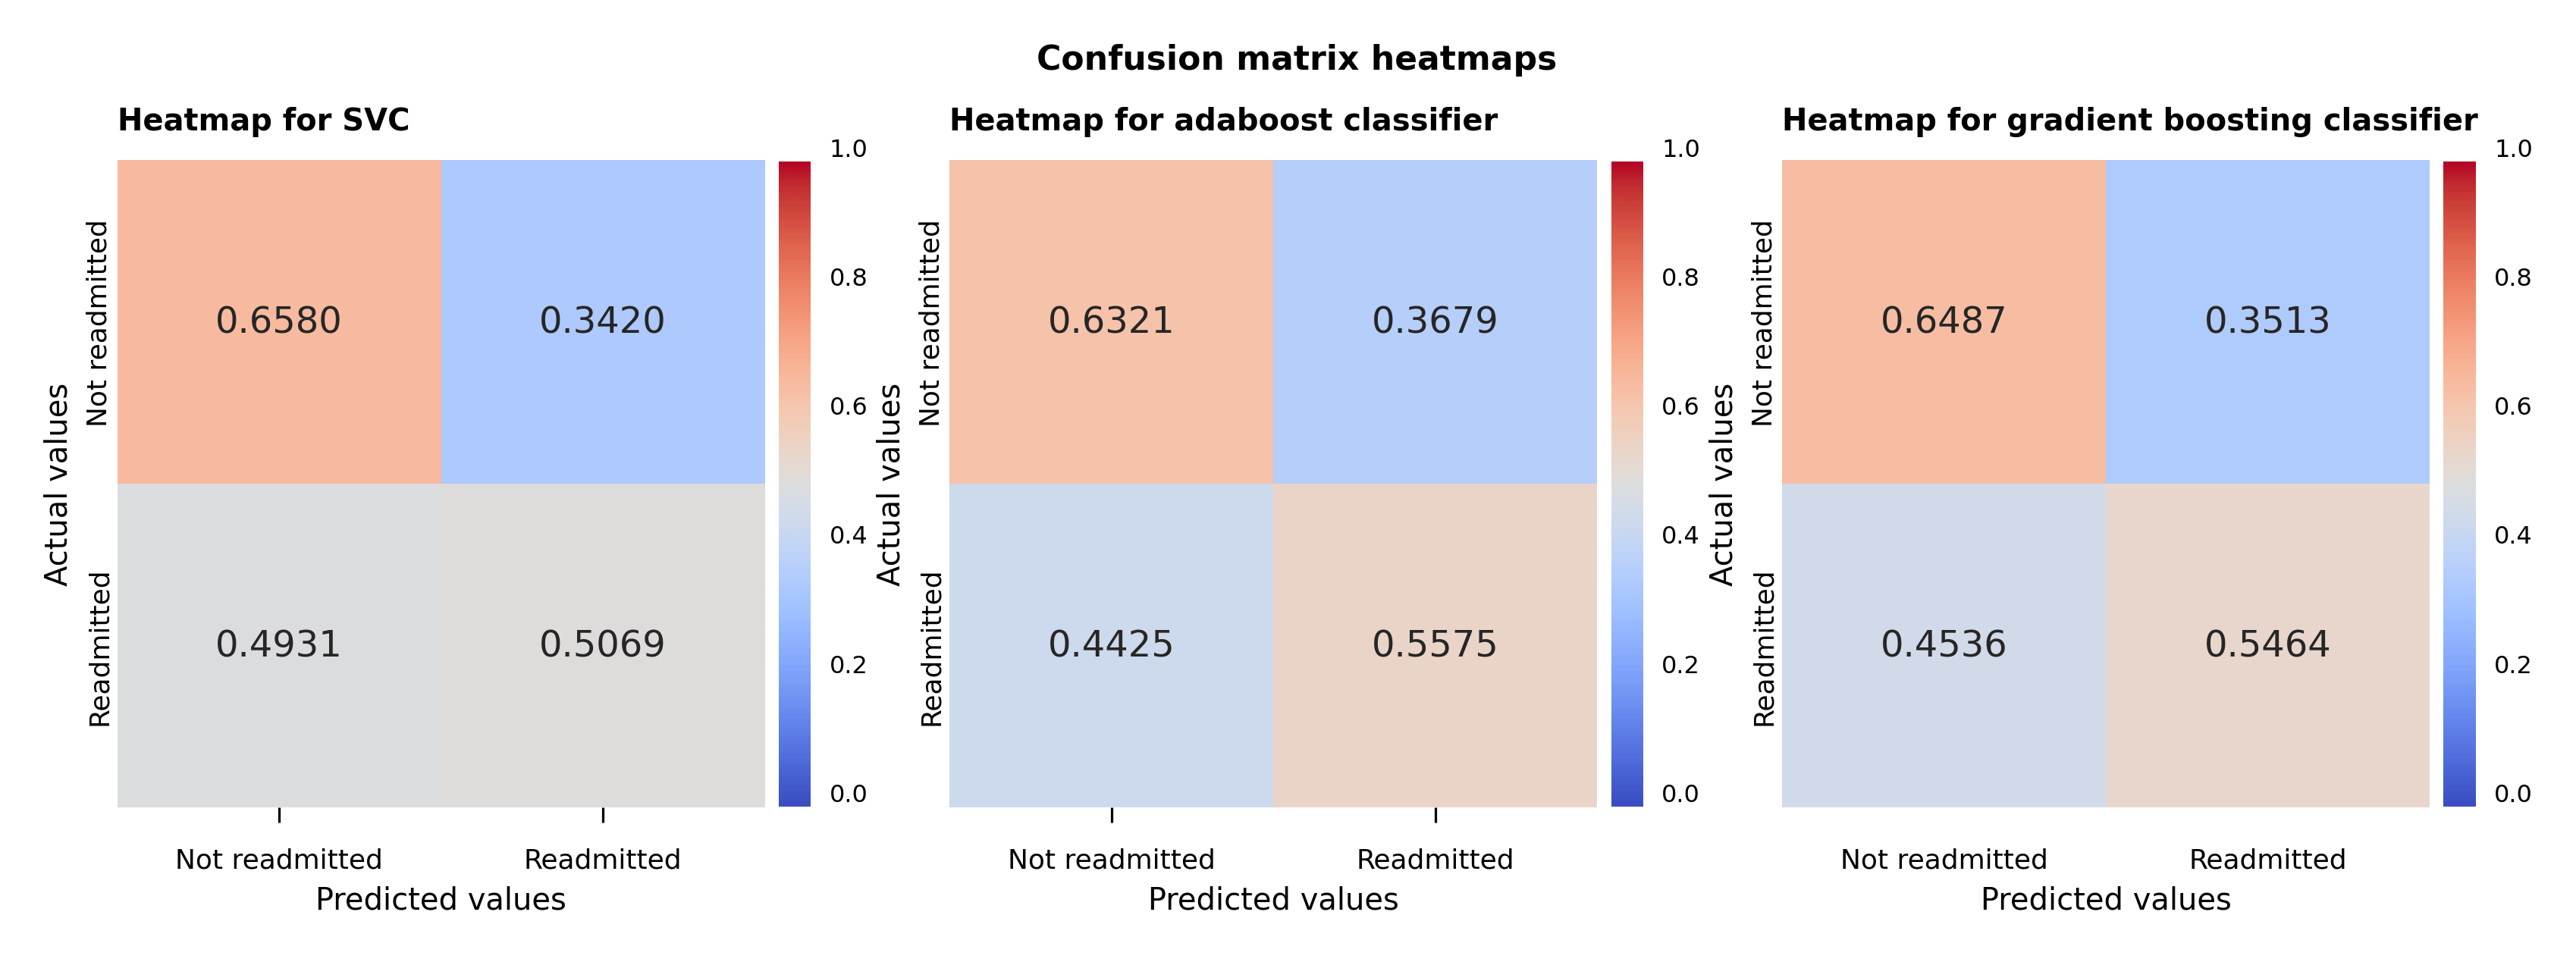 support vector adaboost and gradient boosting classifiers confusion matrix plots